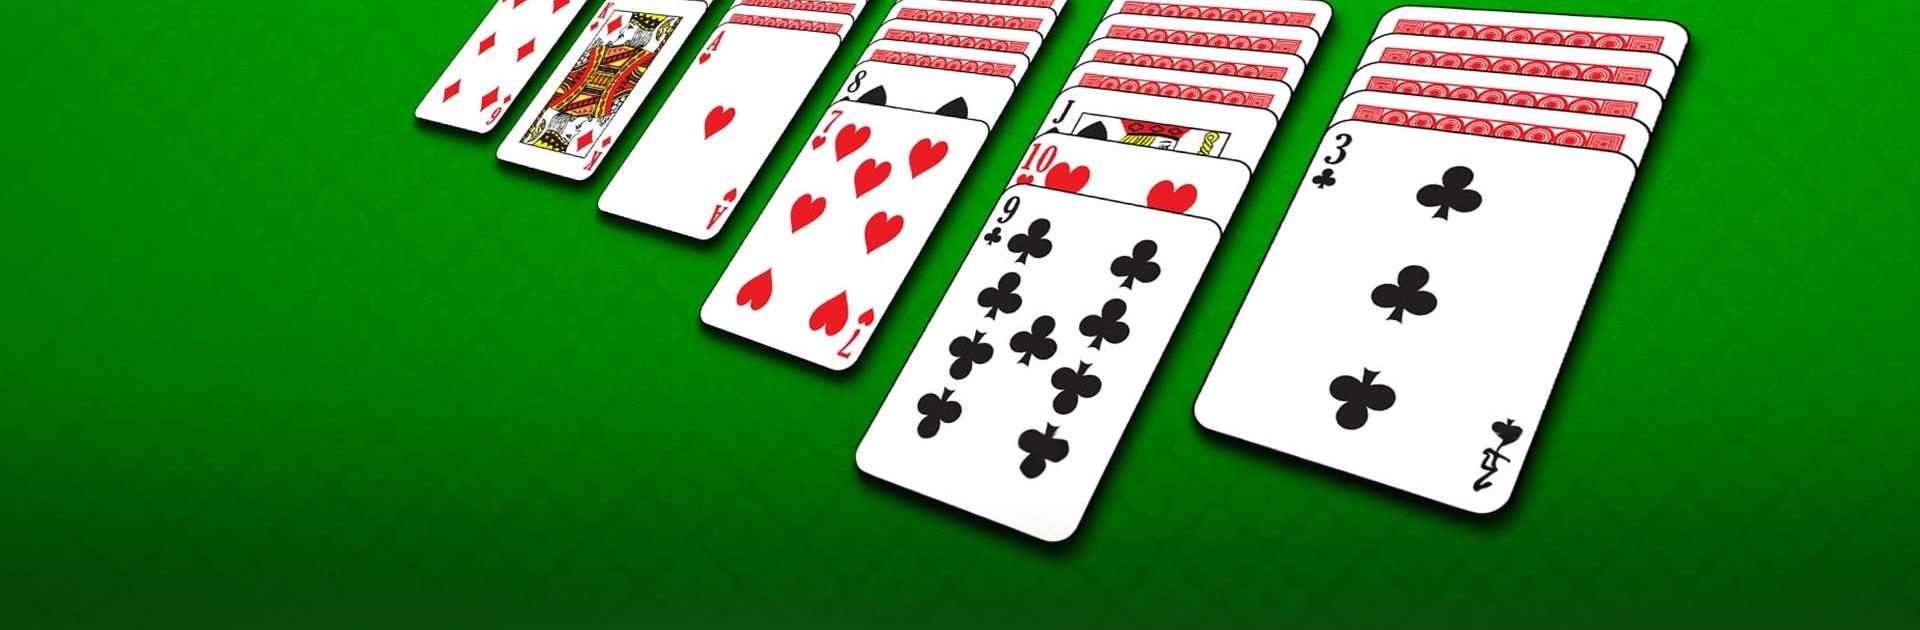 Play Solitaire Solitaire Online